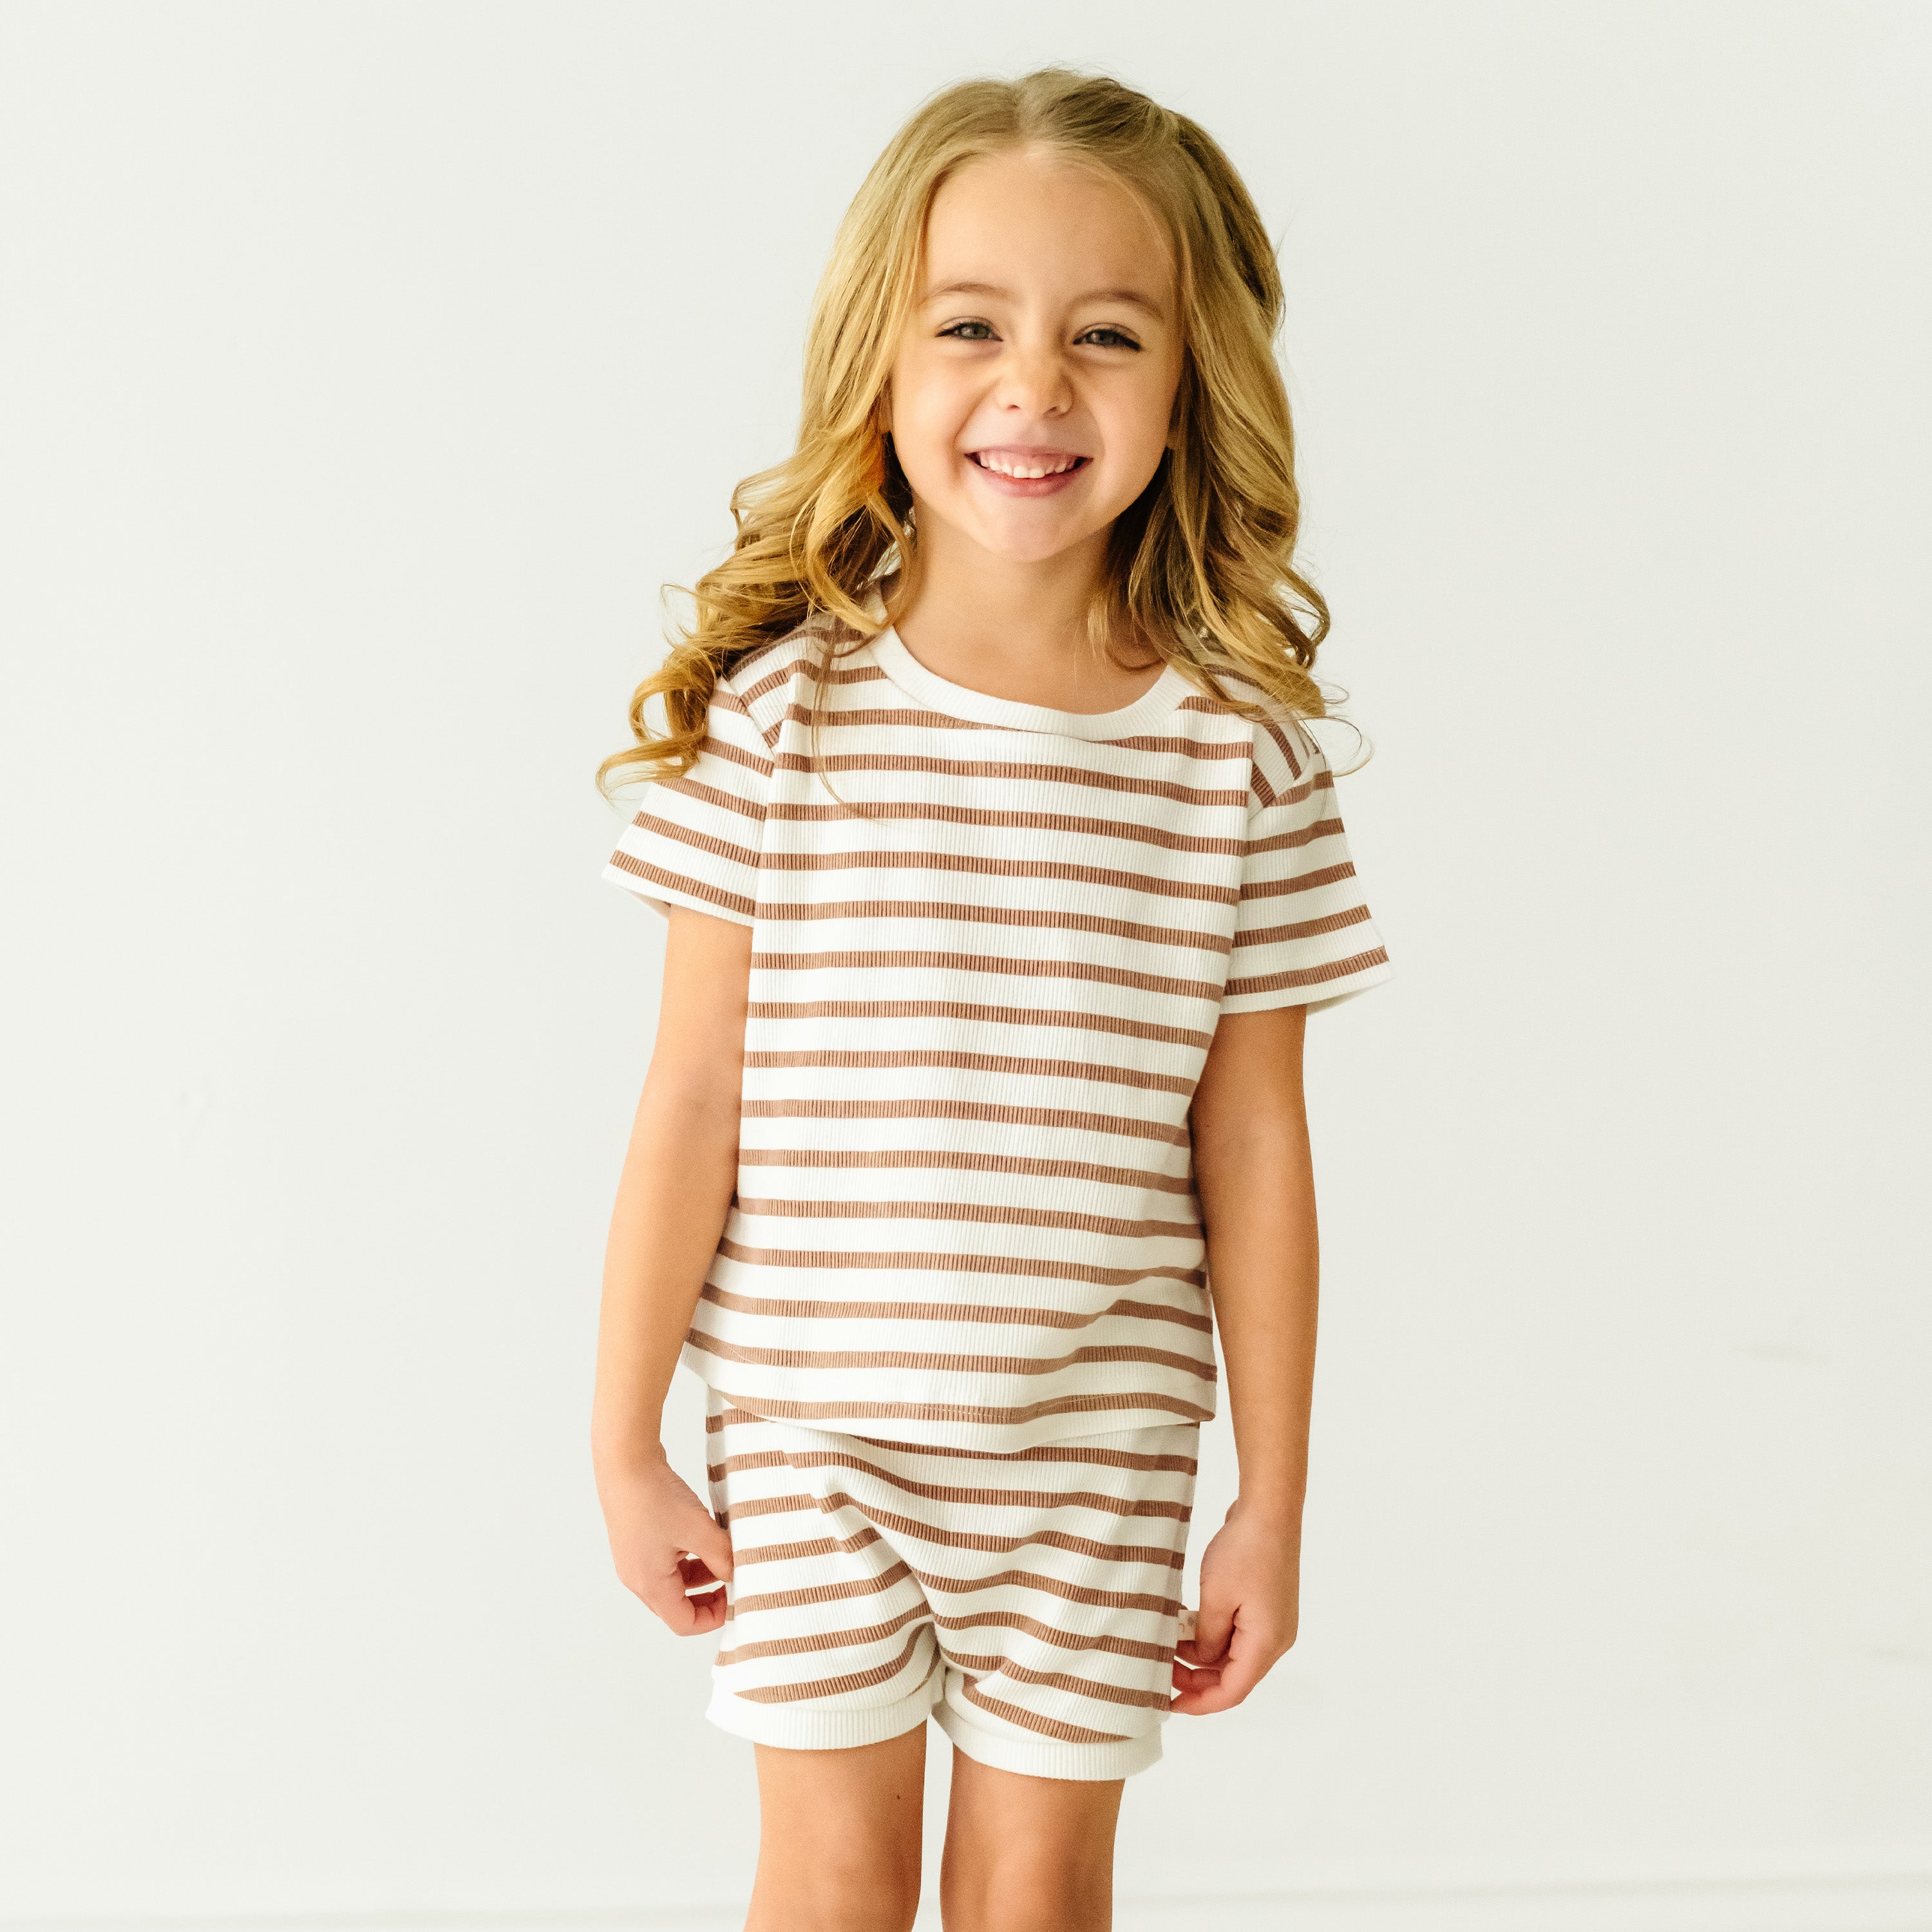 A young girl with curly blonde hair, smiling broadly, wearing the Makemake Organics Organic Tee and Shorties Set in Stripes, standing against a plain white background.